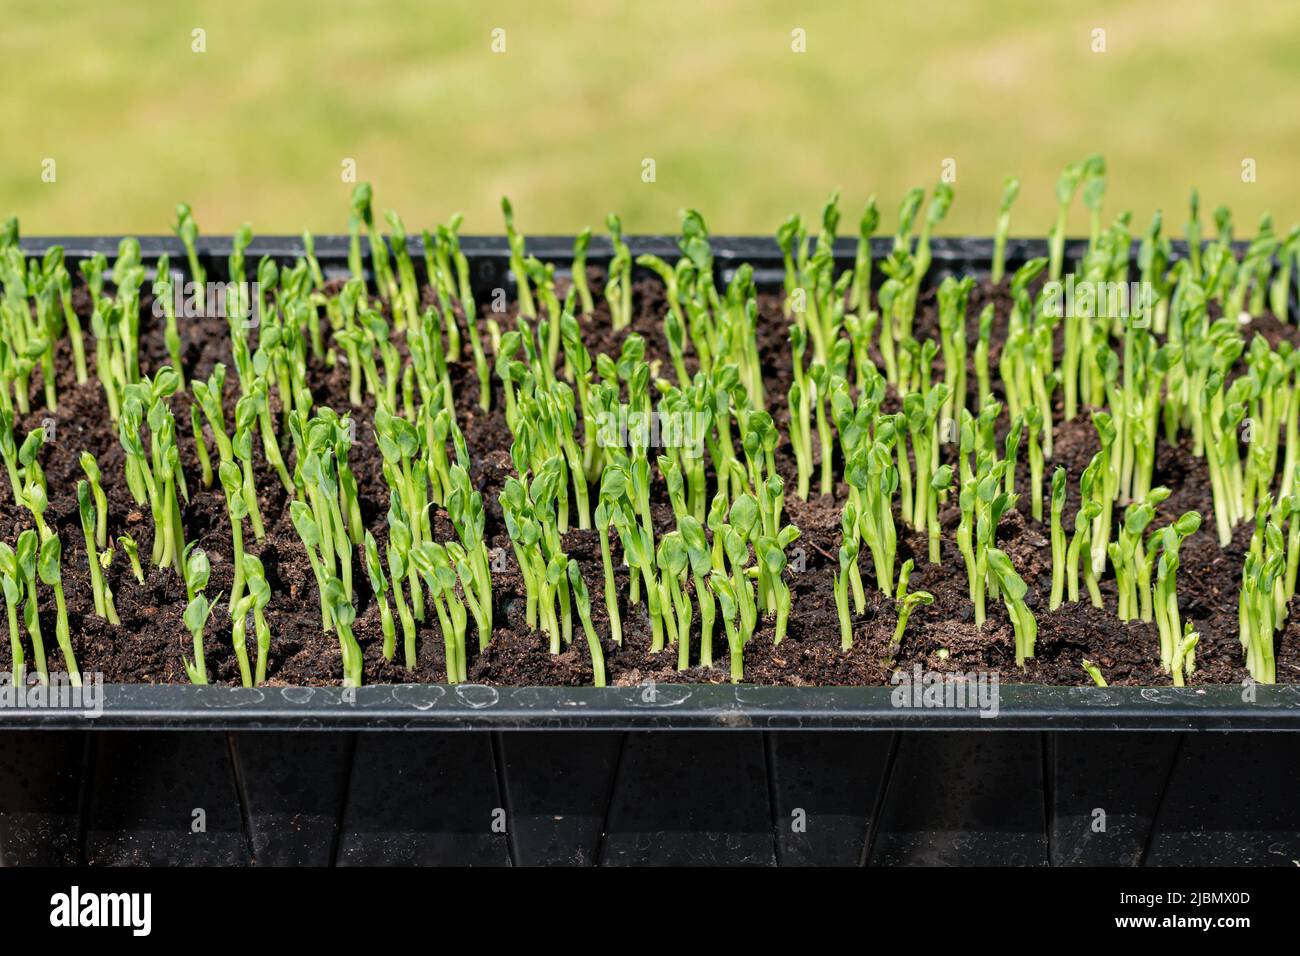 Emerging tips of home-grown pea shoots in a tray Stock Photo